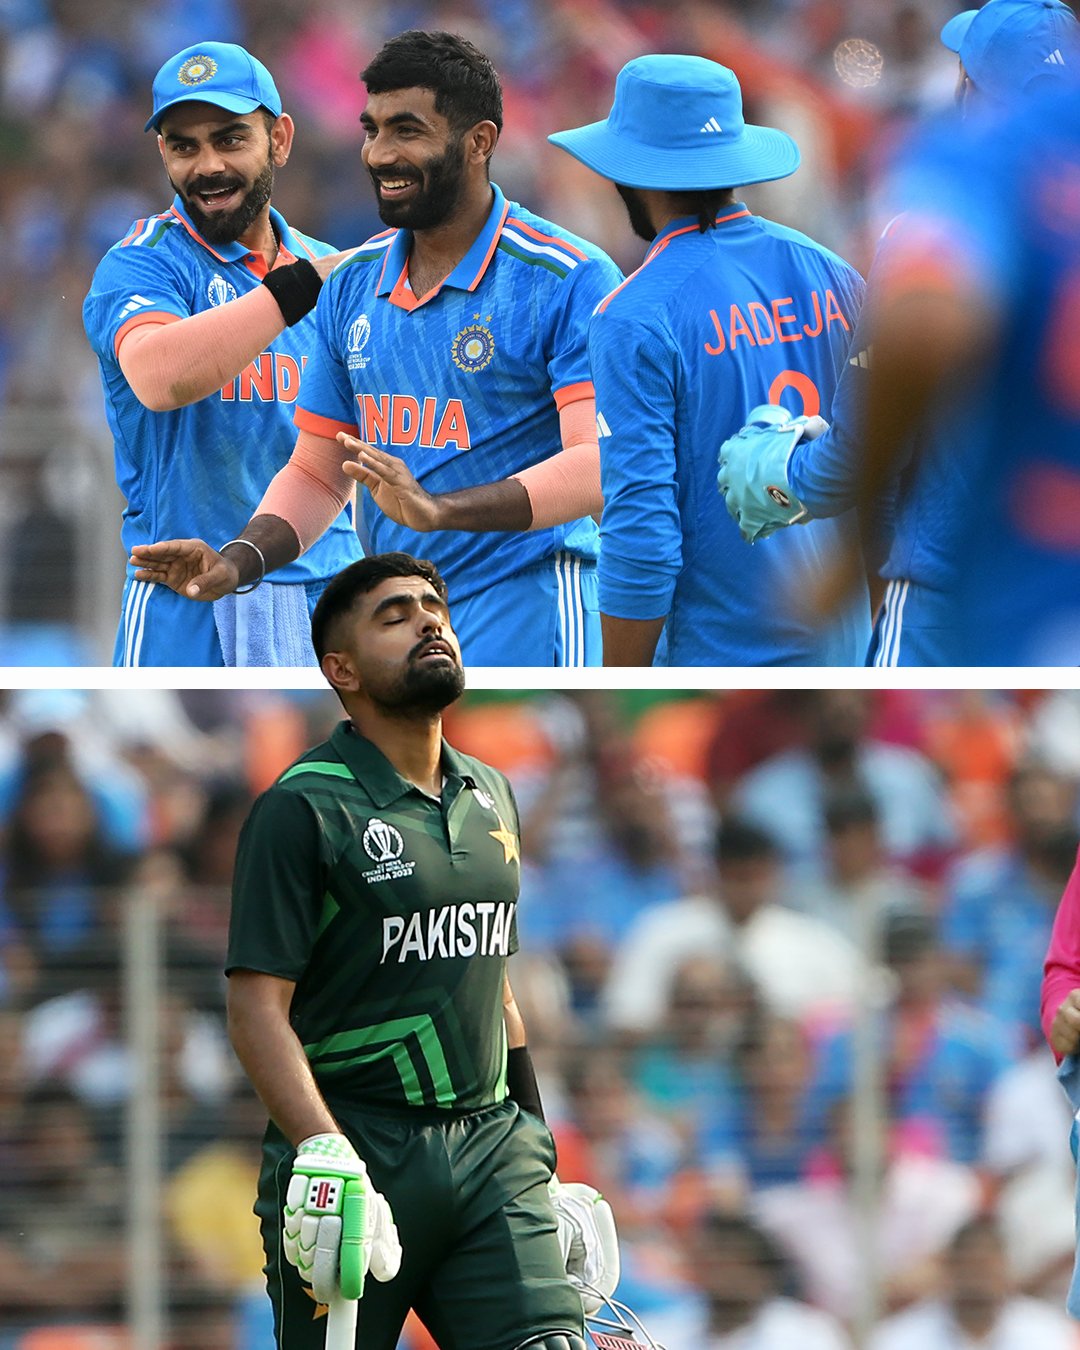 Pakistan’s Batting Collapse Against India: A Disappointing Performance